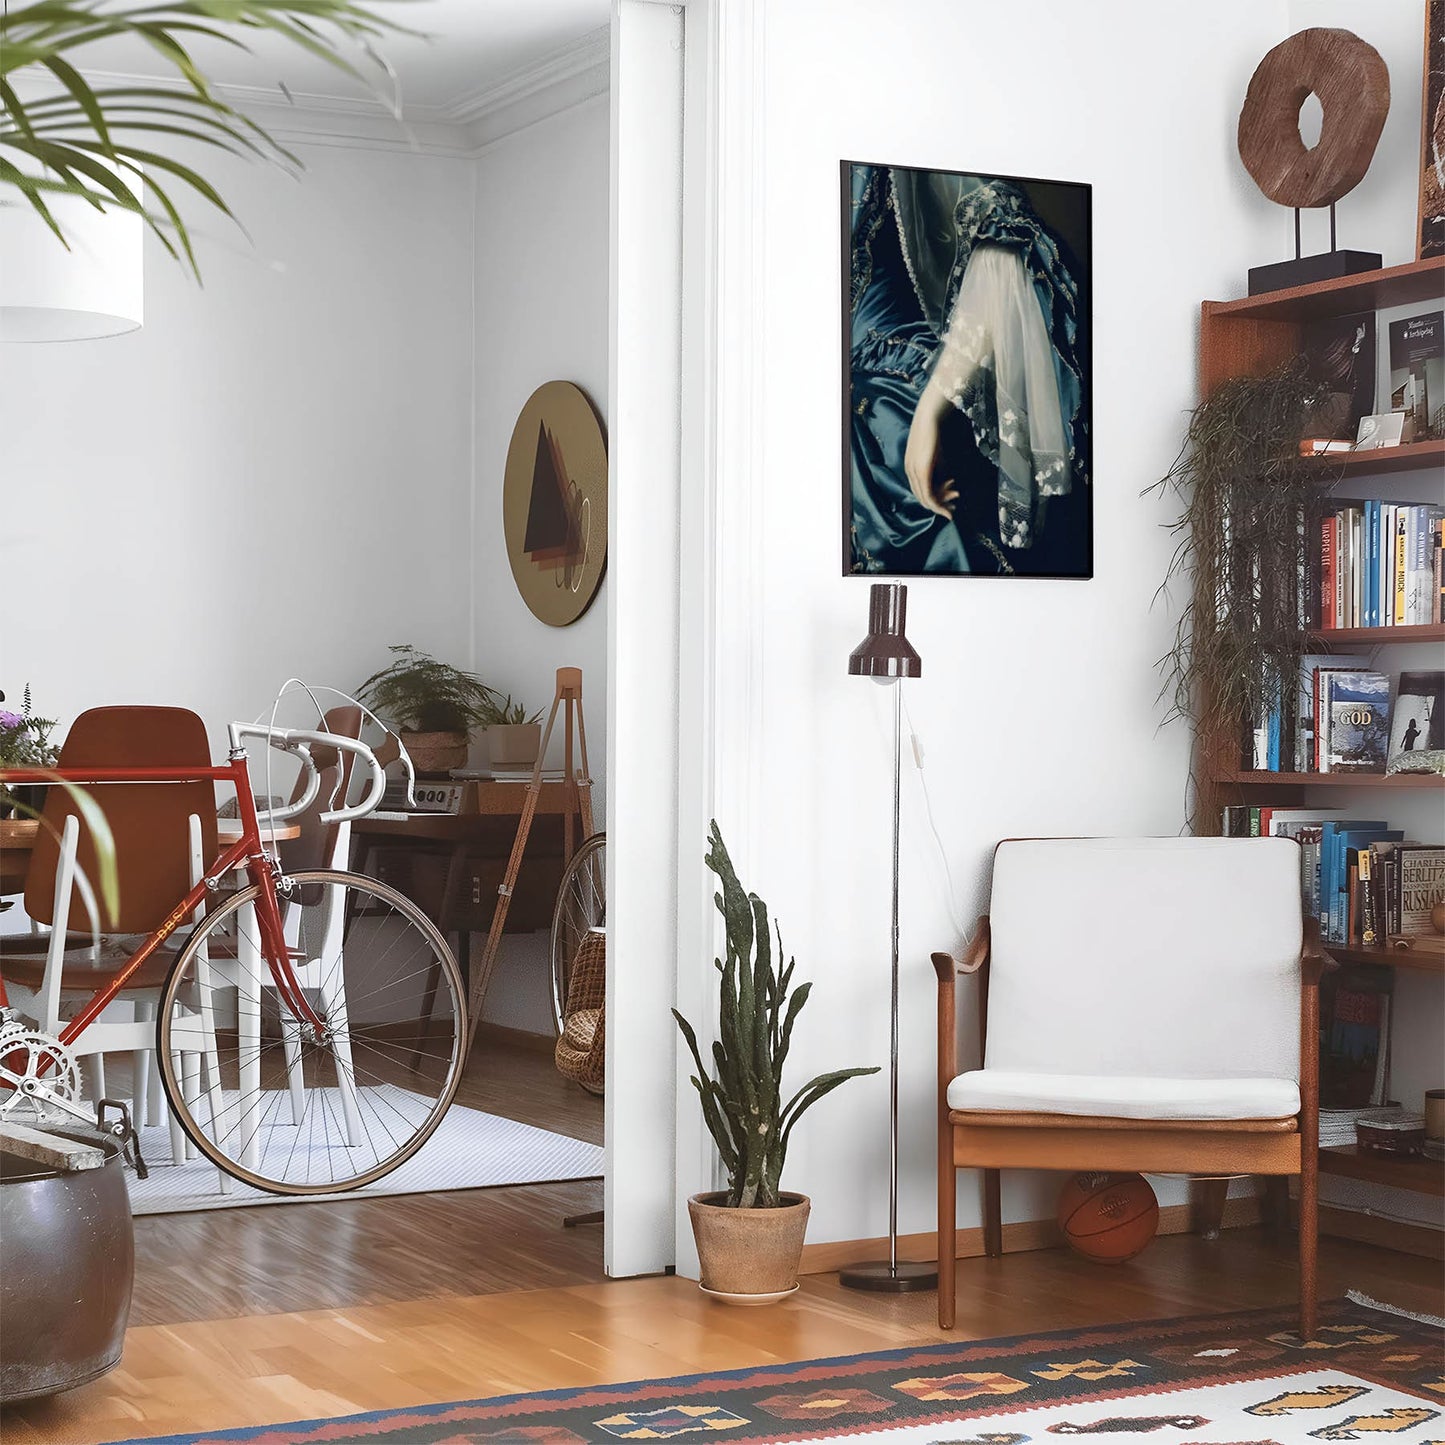 Eclectic living room with a road bike, bookshelf and house plants that features framed artwork of a Aesthetic Sapphire Blue Dress above a chair and lamp